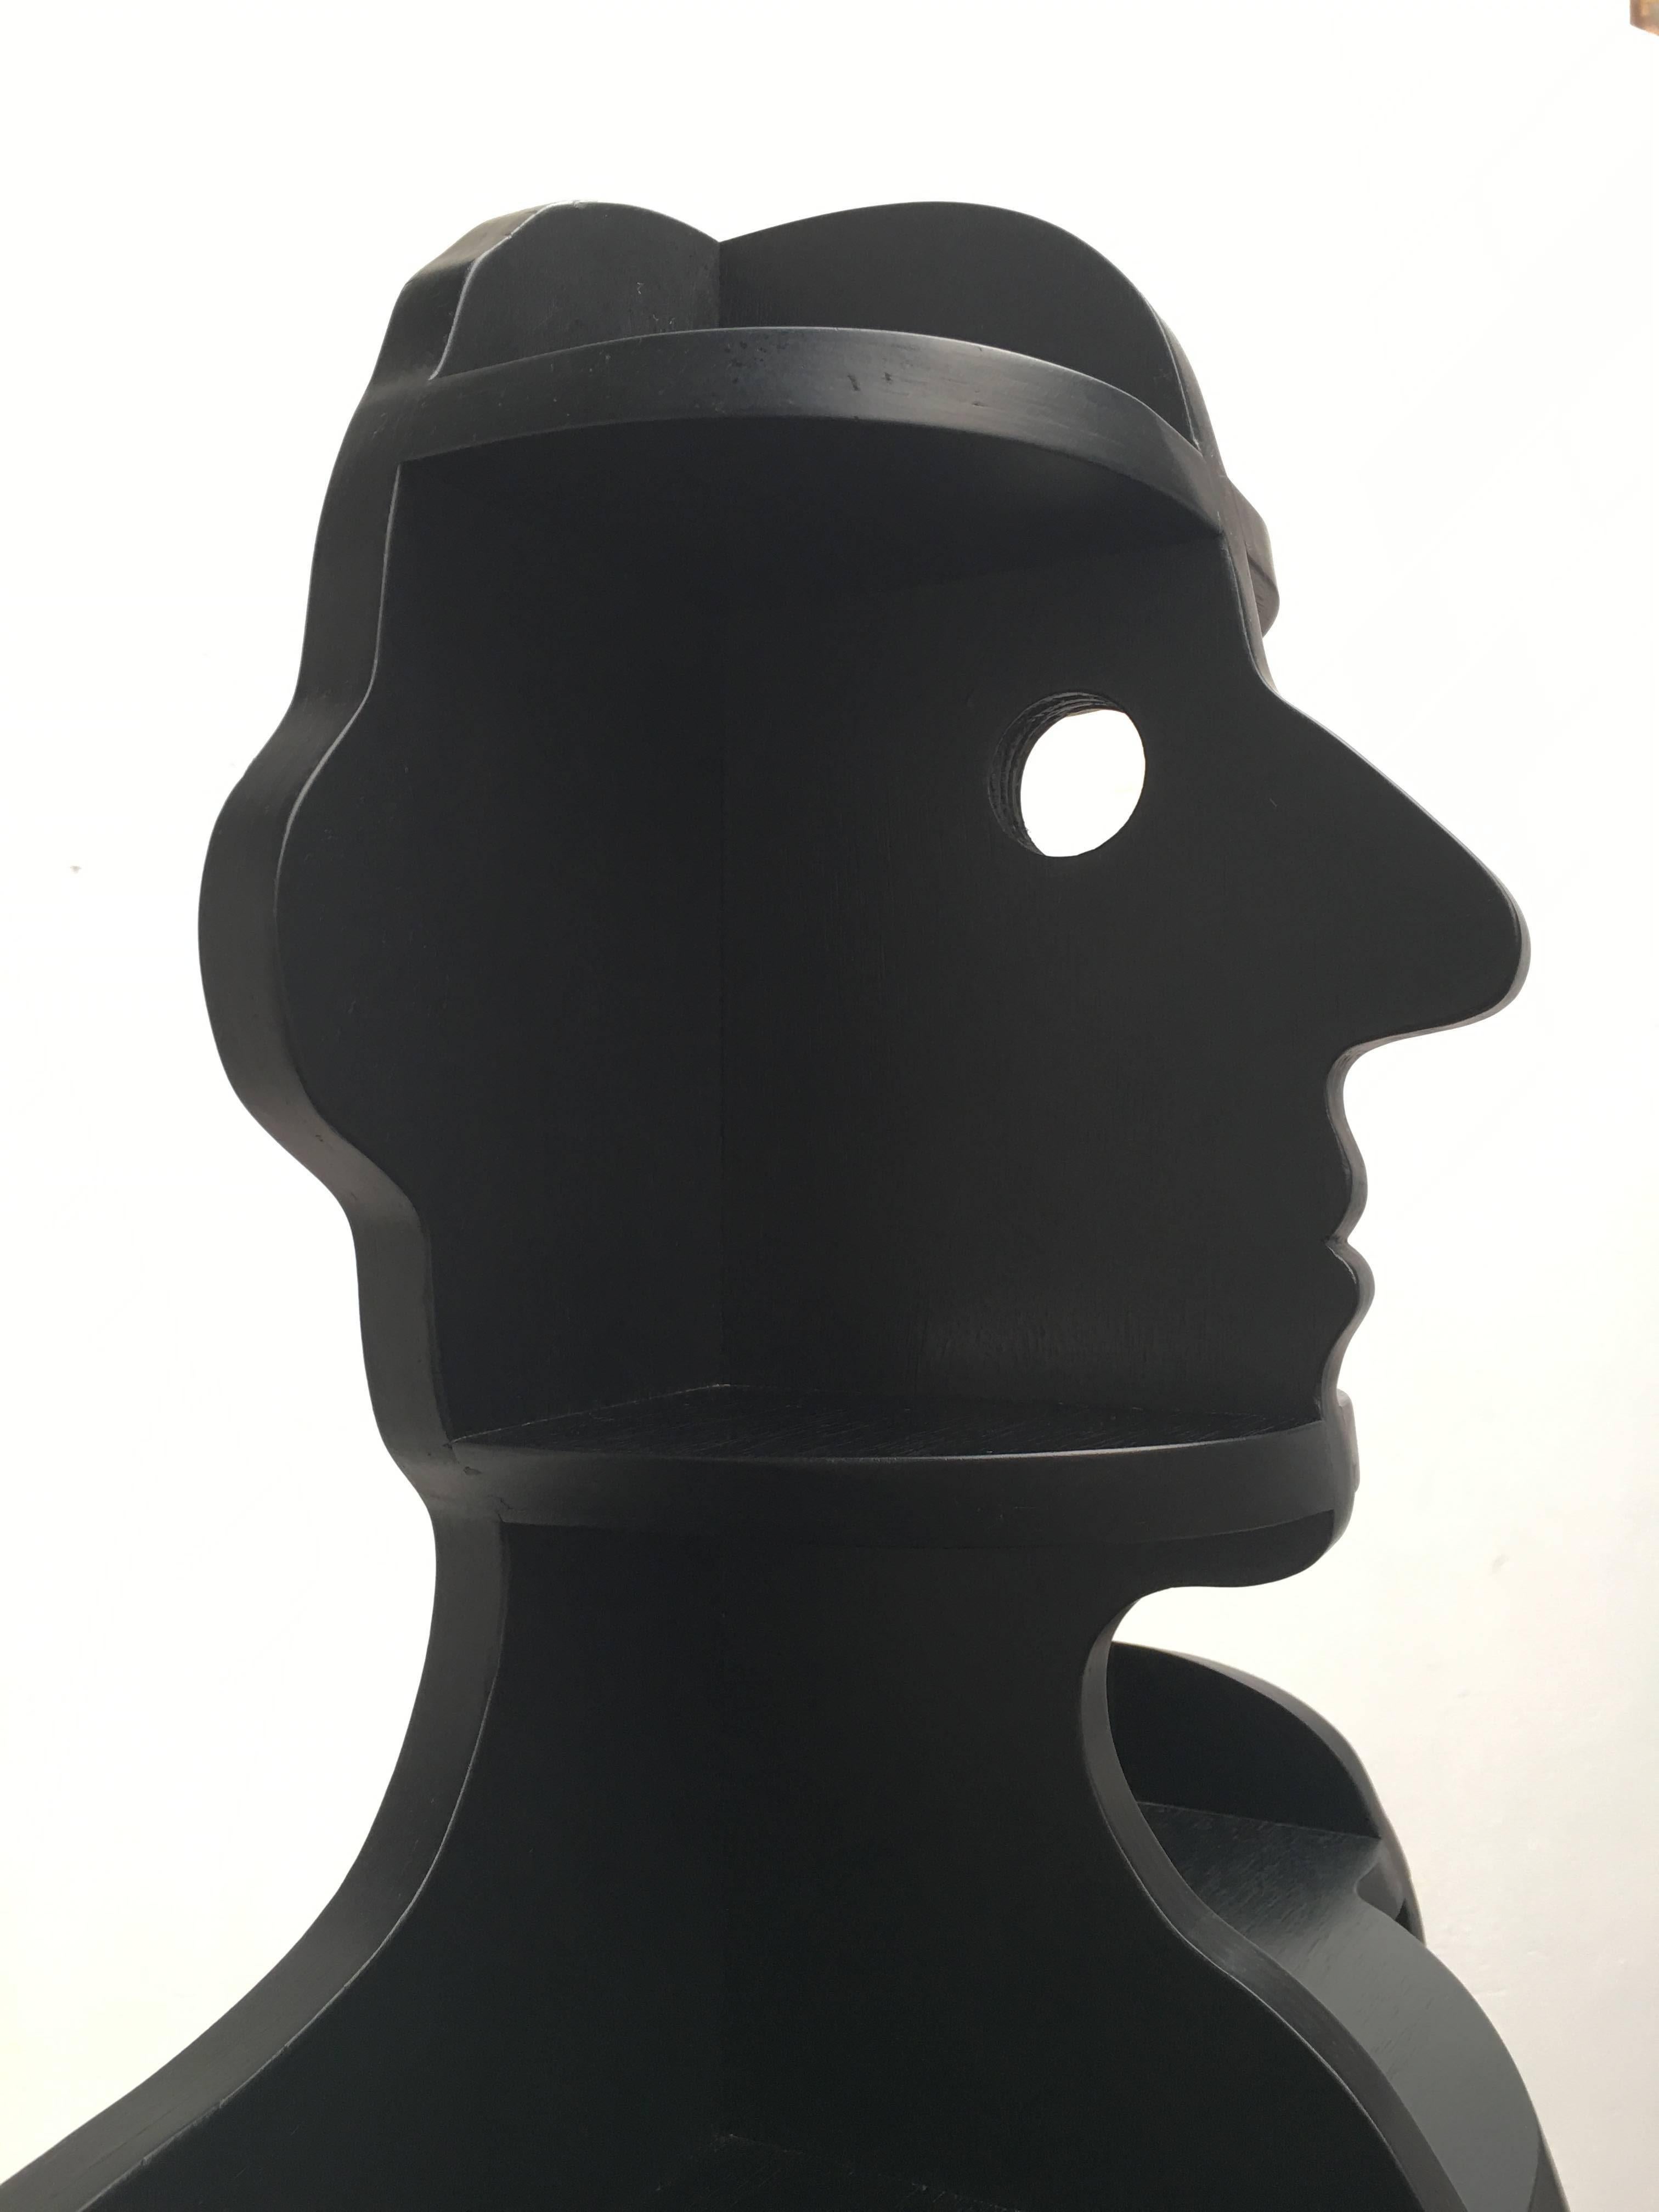 "Facherman" or translated in English "Compartment man" by Swiss designers couple Susi & Ueli Berger produced by Röthlisberger Kollektion, Switzerland, 1977.

The amendable giant is his own man, he alters according to what